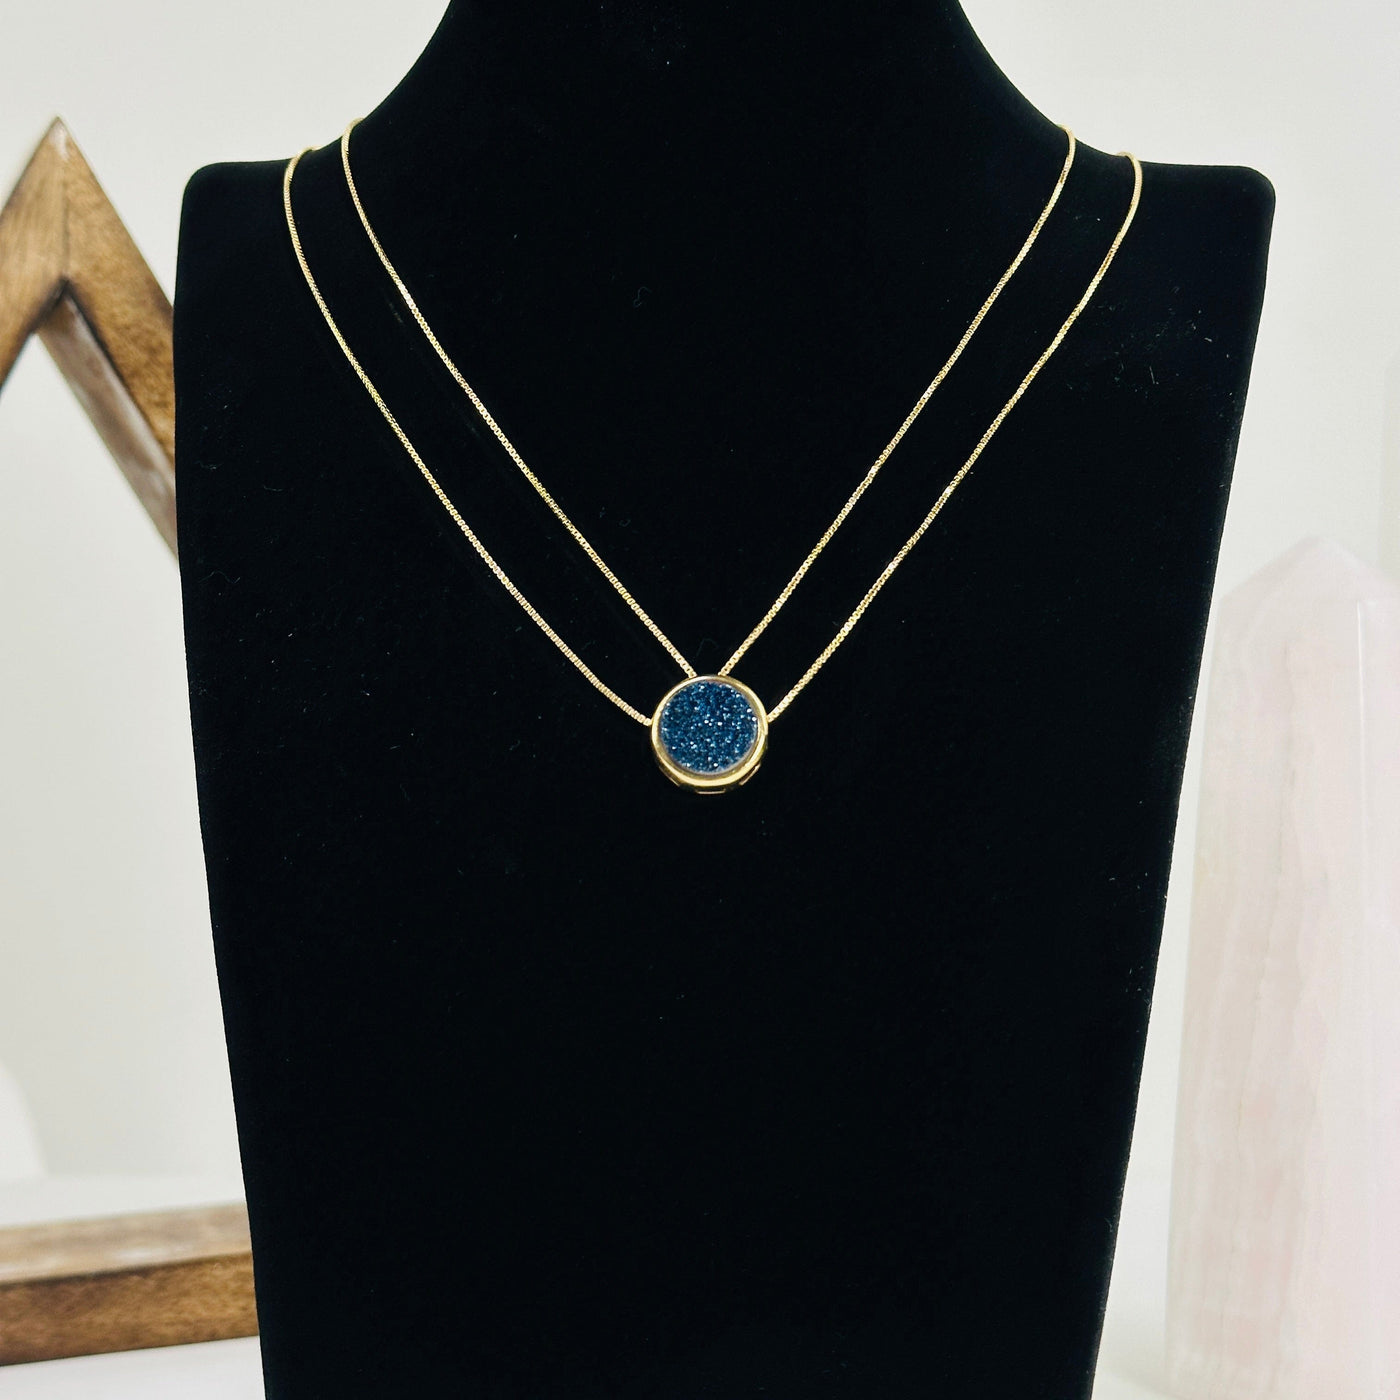 Mystic blue druzy double chain gold necklace with decorations in the background